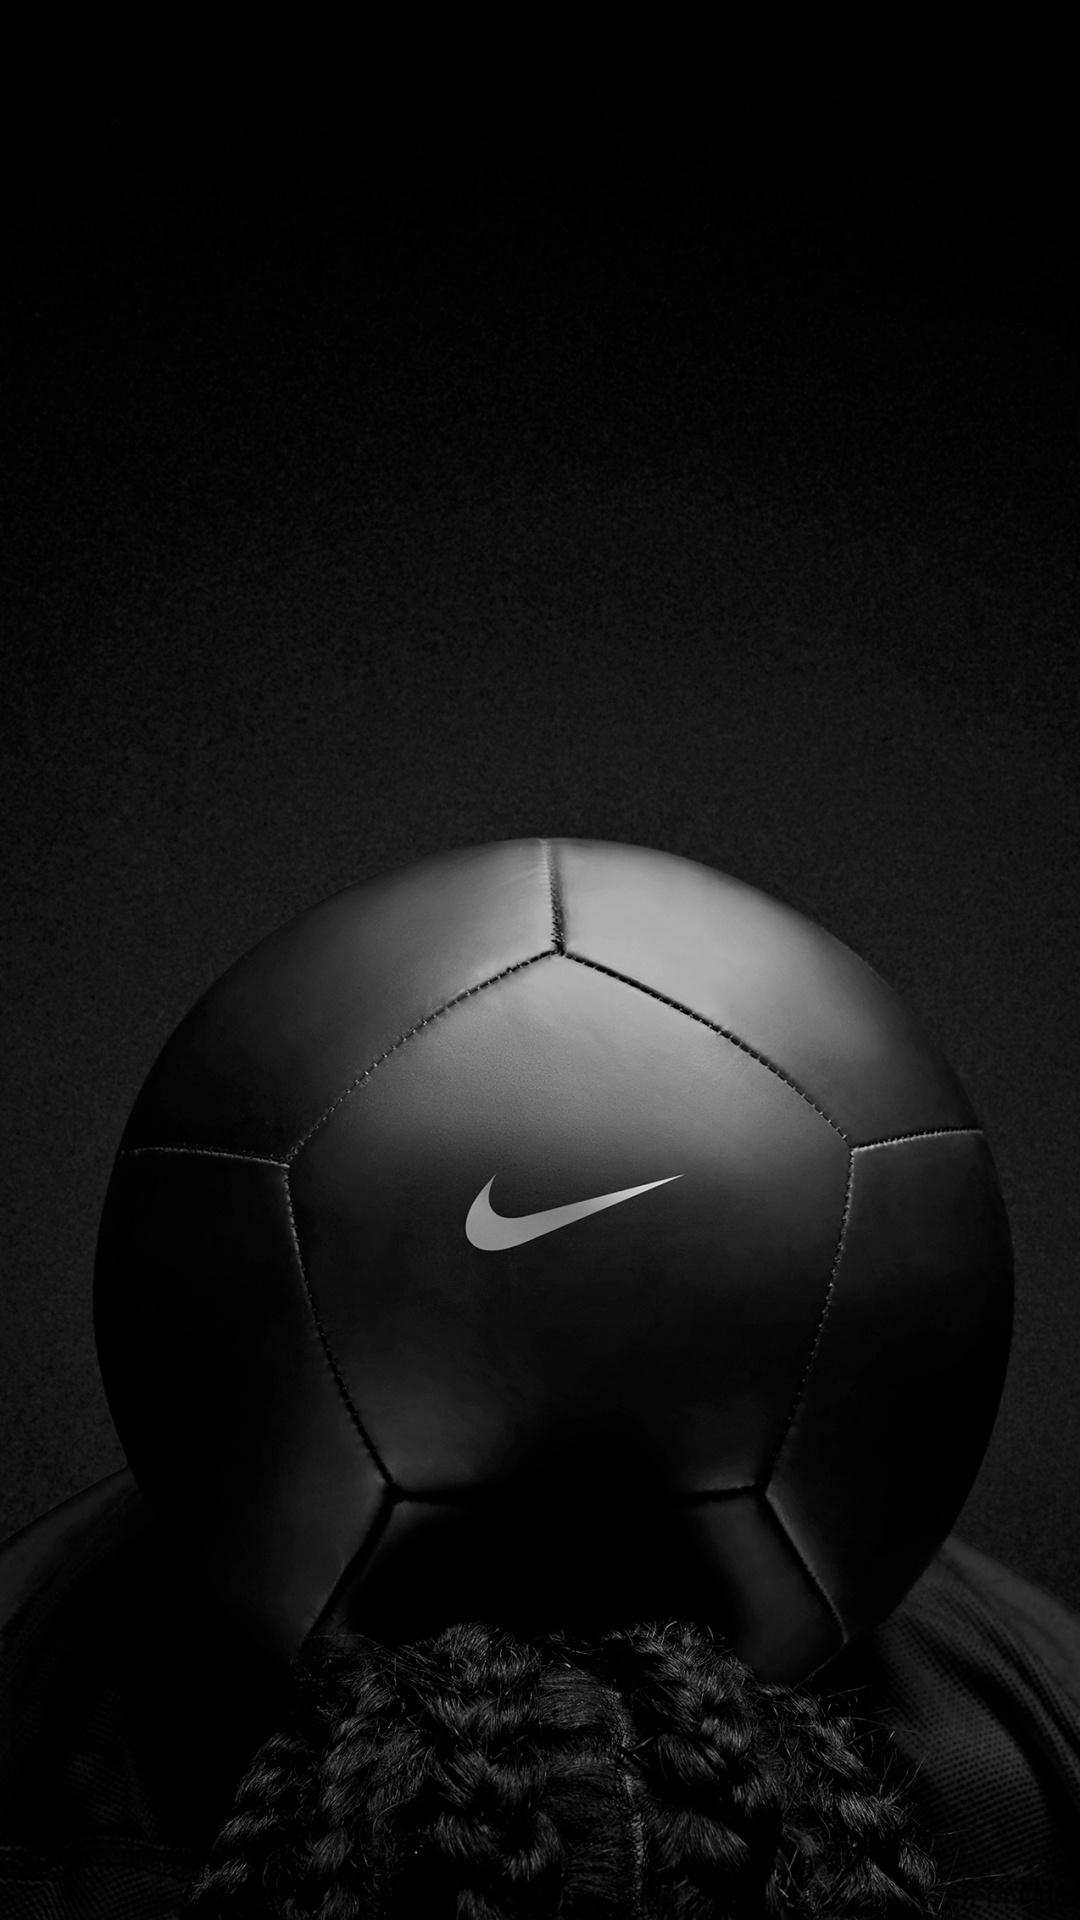 Grayscale Photo of Soccer Ball. Wallpaper in 1080x1920 Resolution